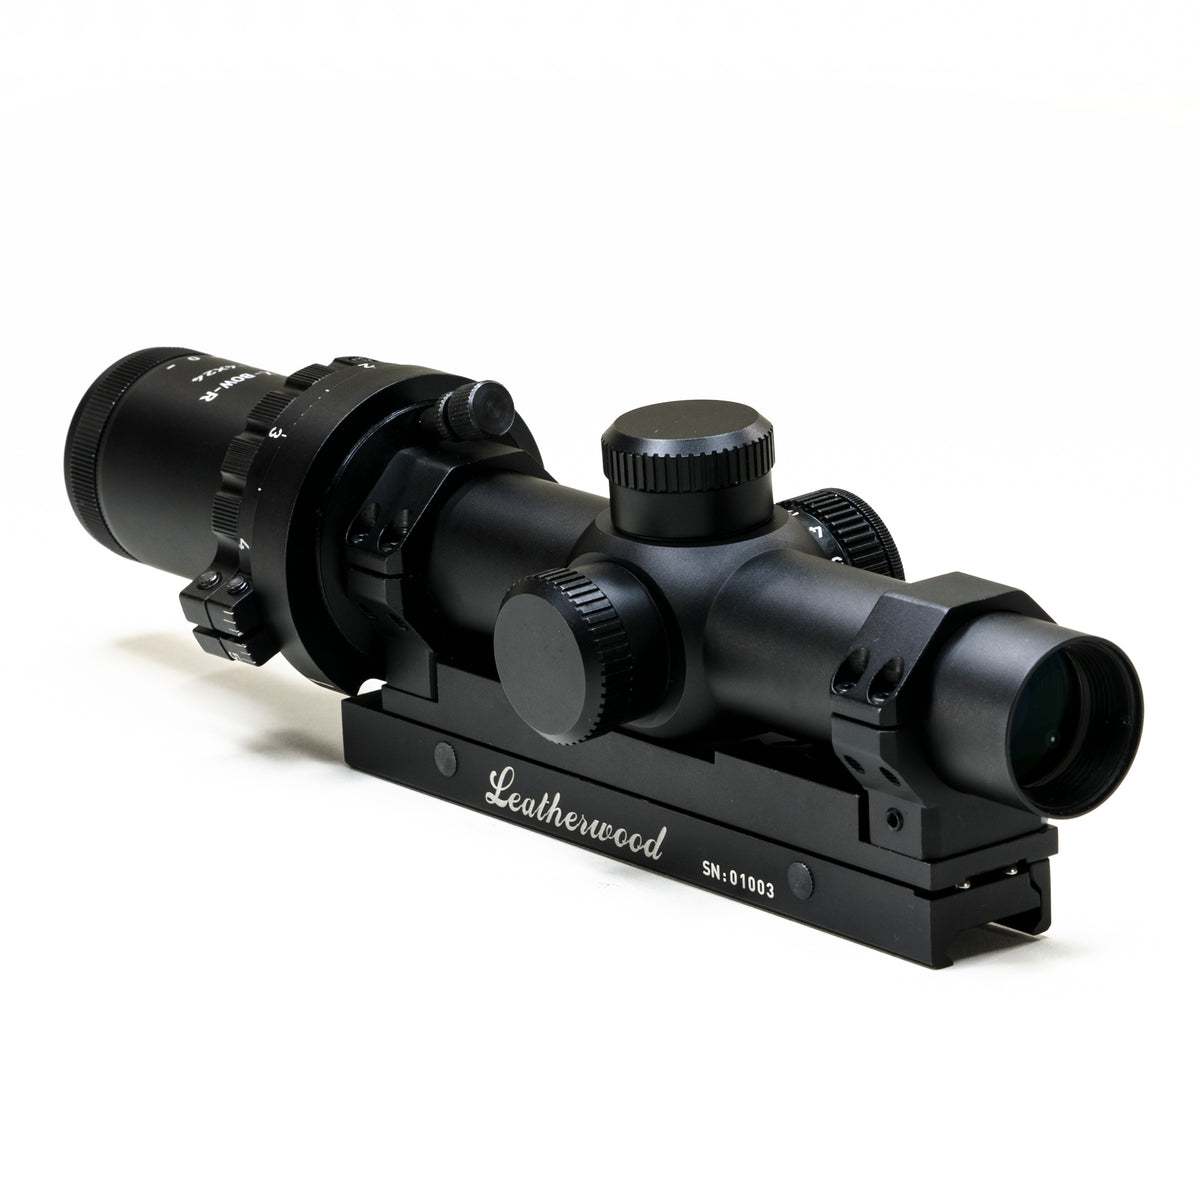 ART X-BOW Crossbow Scope Objective Angle View